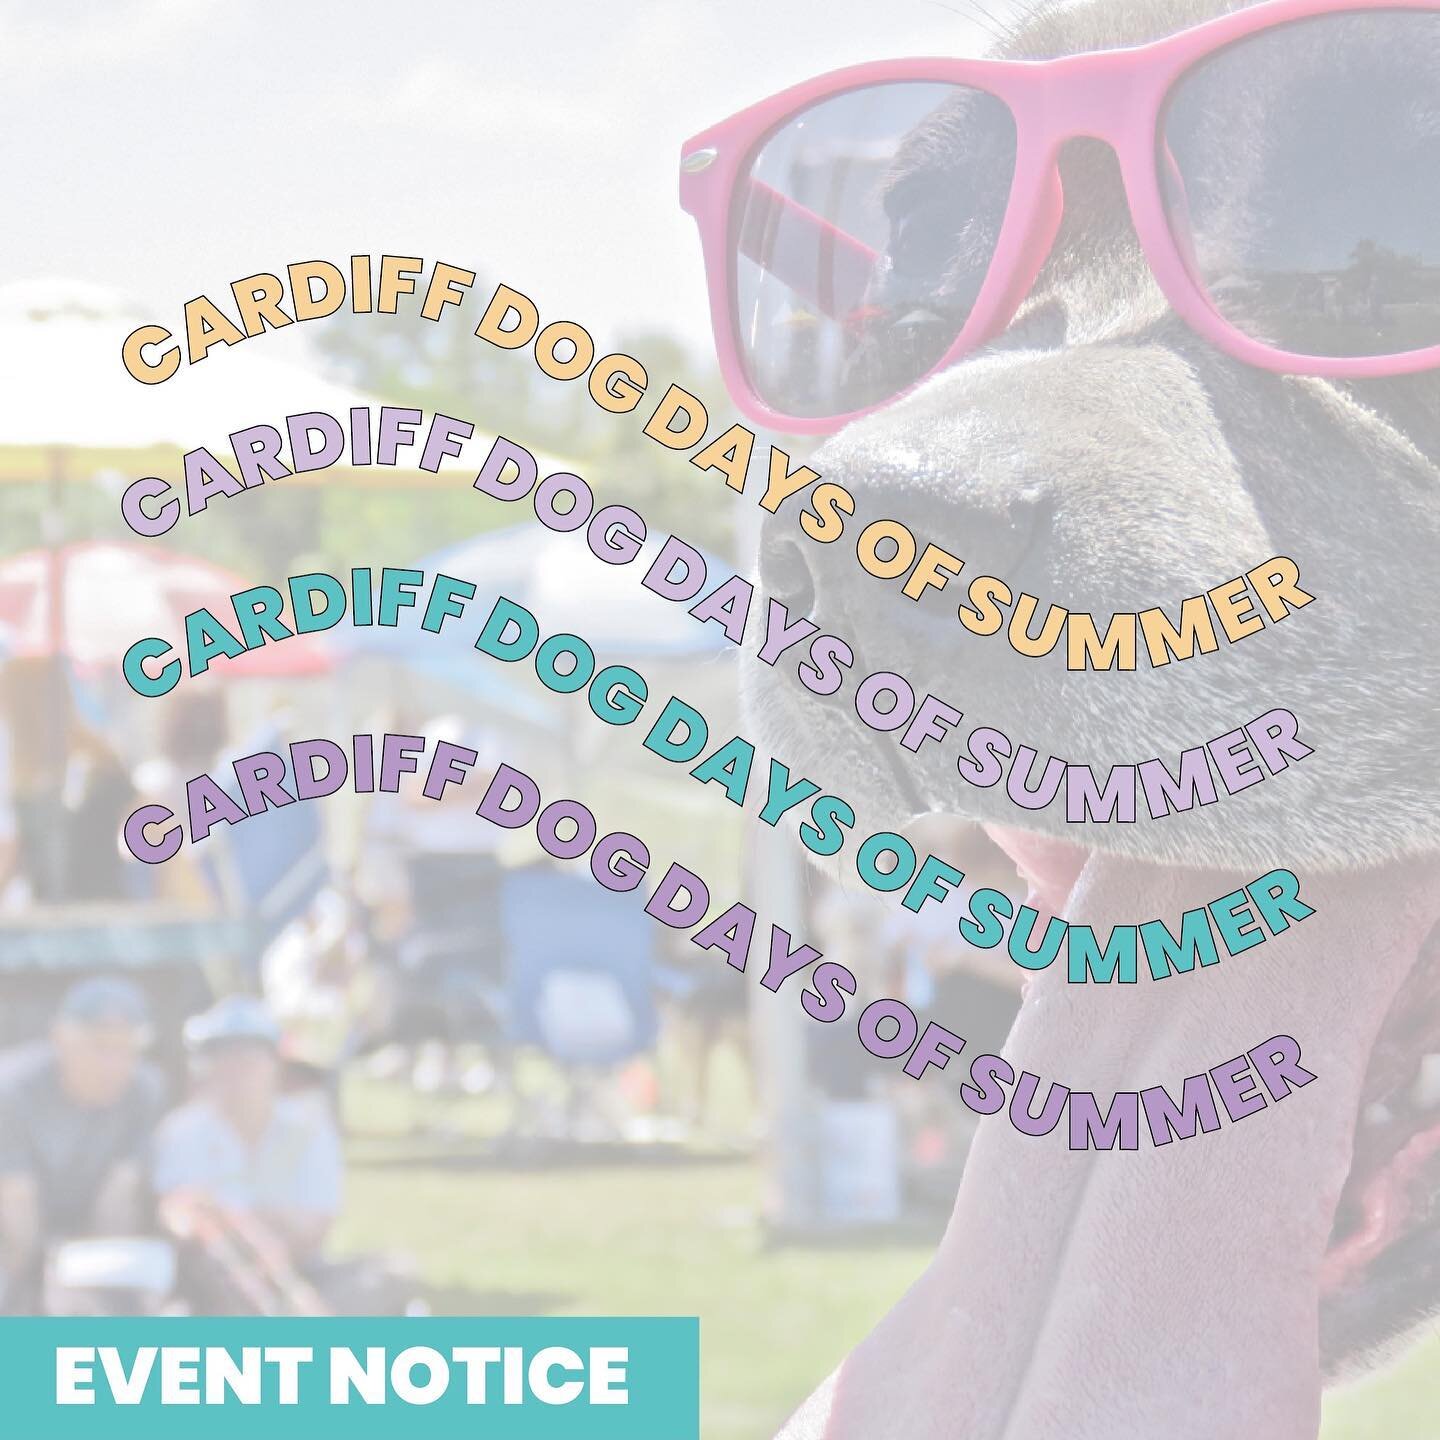 Event Notice: Cardiff Dog Days of Summer 💛

Cardiff Dog Days of Summer is a free one-day festival celebrating our favorite four legged friends. There is something for everyone, including dogs and dog lovers! 🐾🐶🐱💜

This Sunday, August 8th, Paws4E